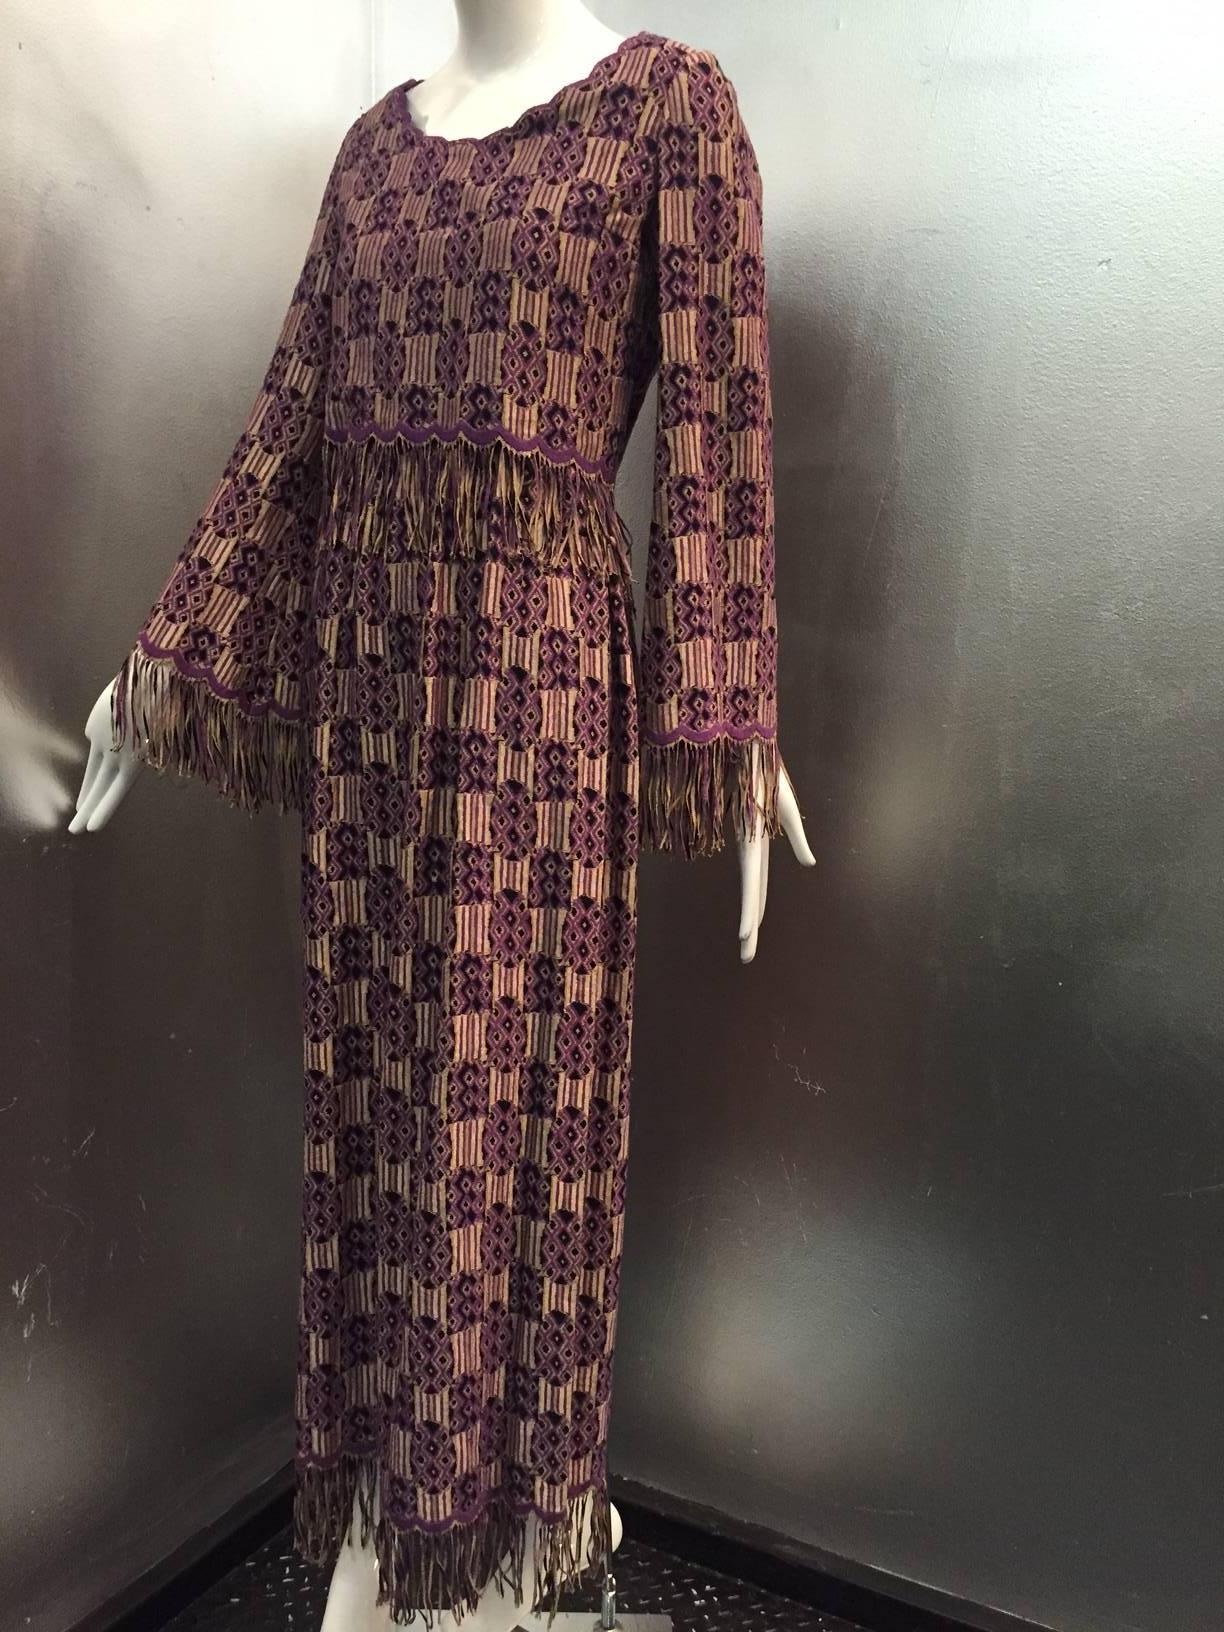 A wonderful late 1960s Christian Dior ethnic-inspired purple, black and tan brocade maxi dress with free floating top overlay. Scalloped and fringed sleeves, midriff and hem. Zippered back.